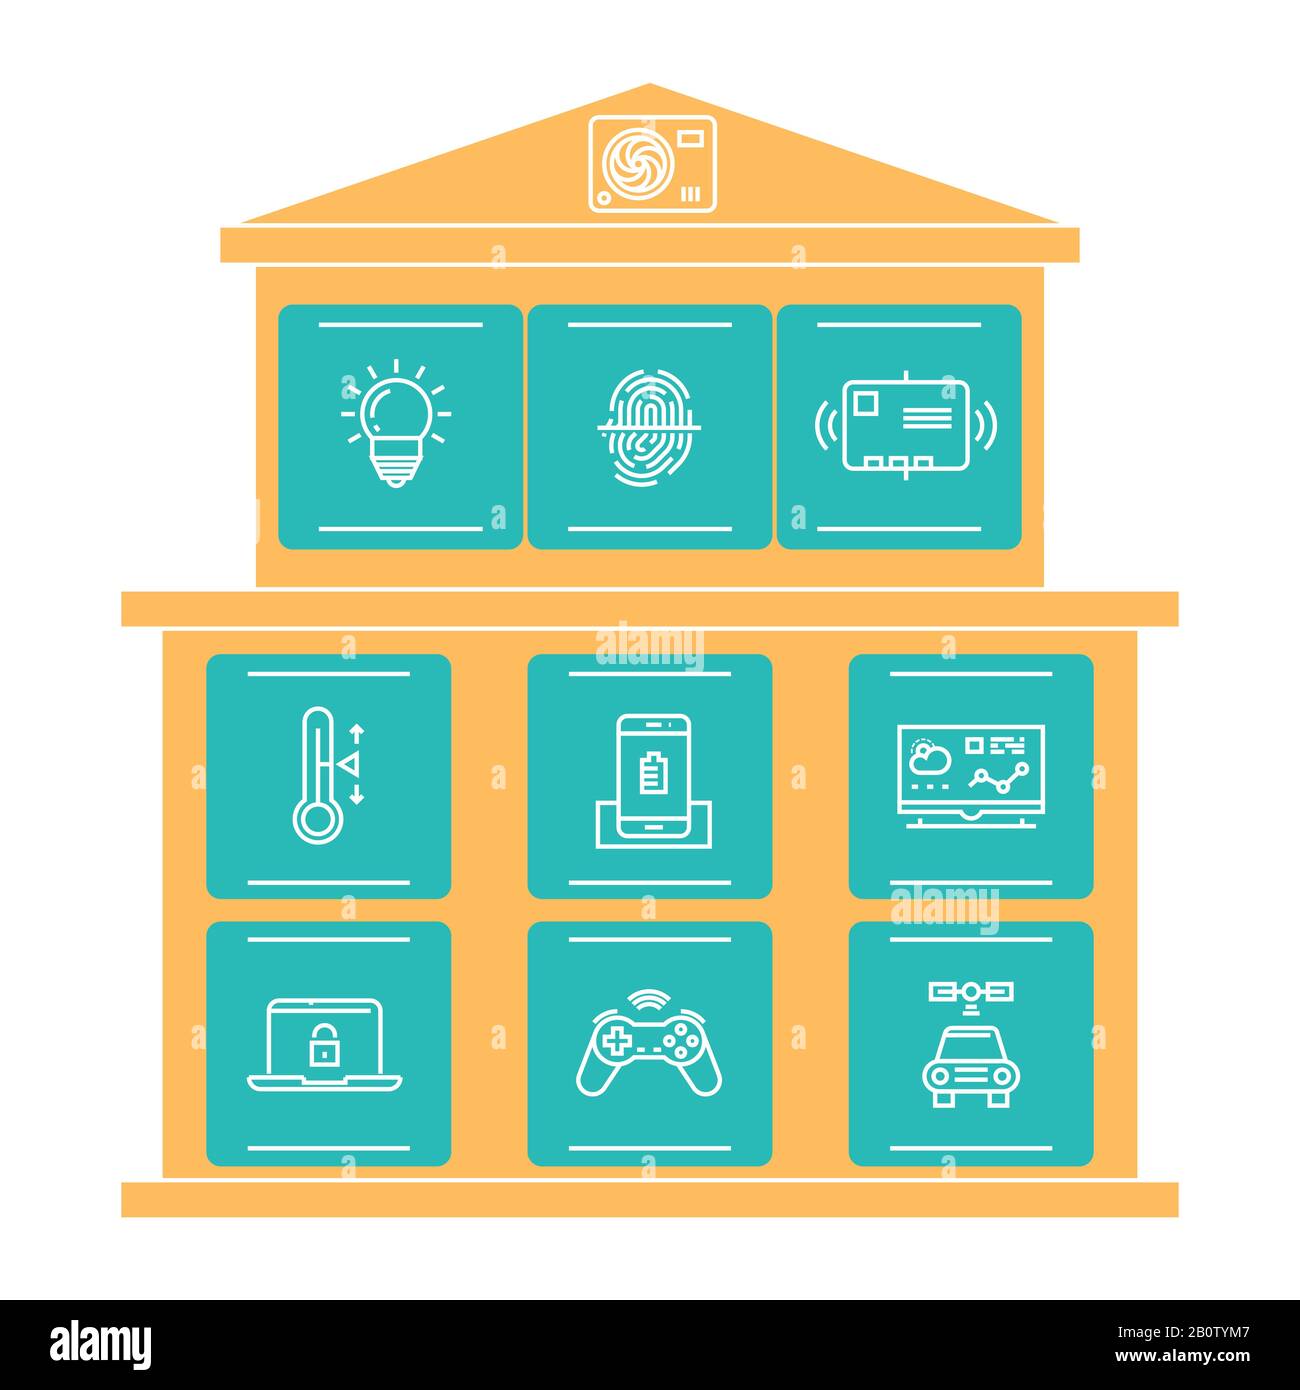 Thin line icons smart home concept isolated on white background. Technology smar home, vector illustration Stock Vector